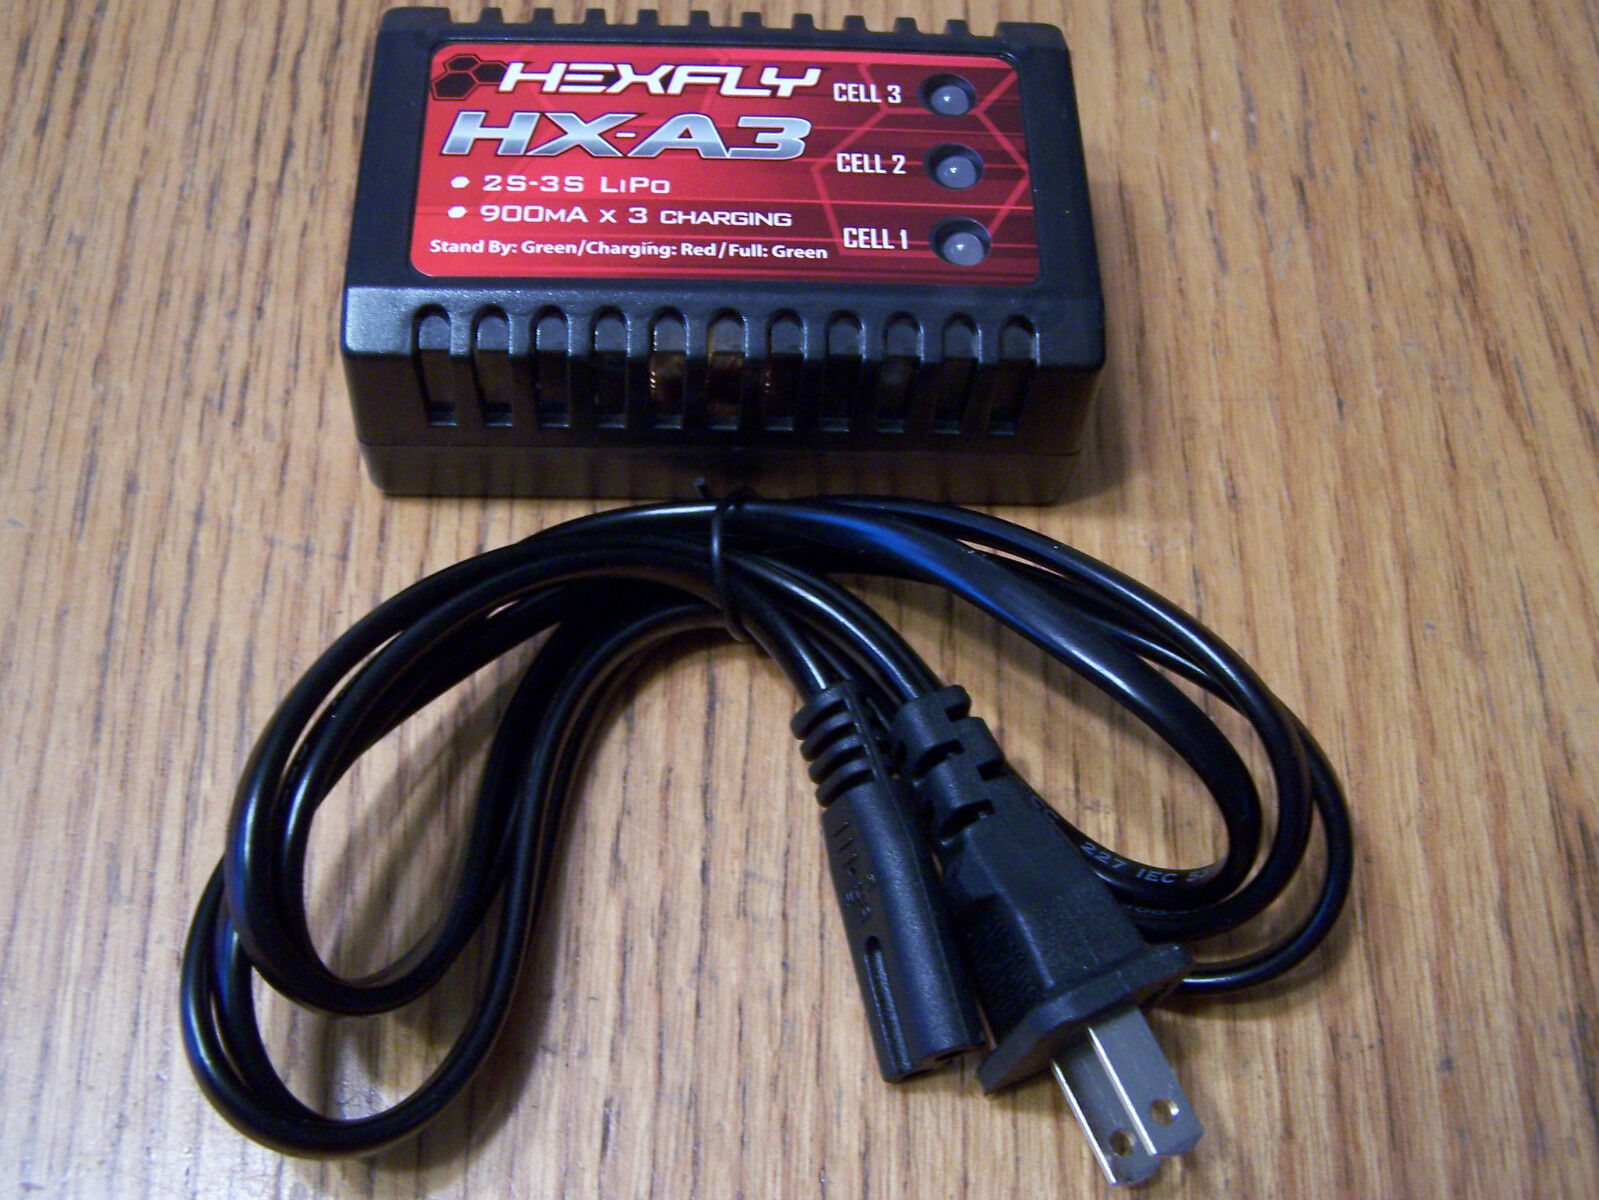 Redcat Racing Hexfly Hx-a3 Lipo Battery Charger Balancer 2s-3s / Traxxas Turnigy